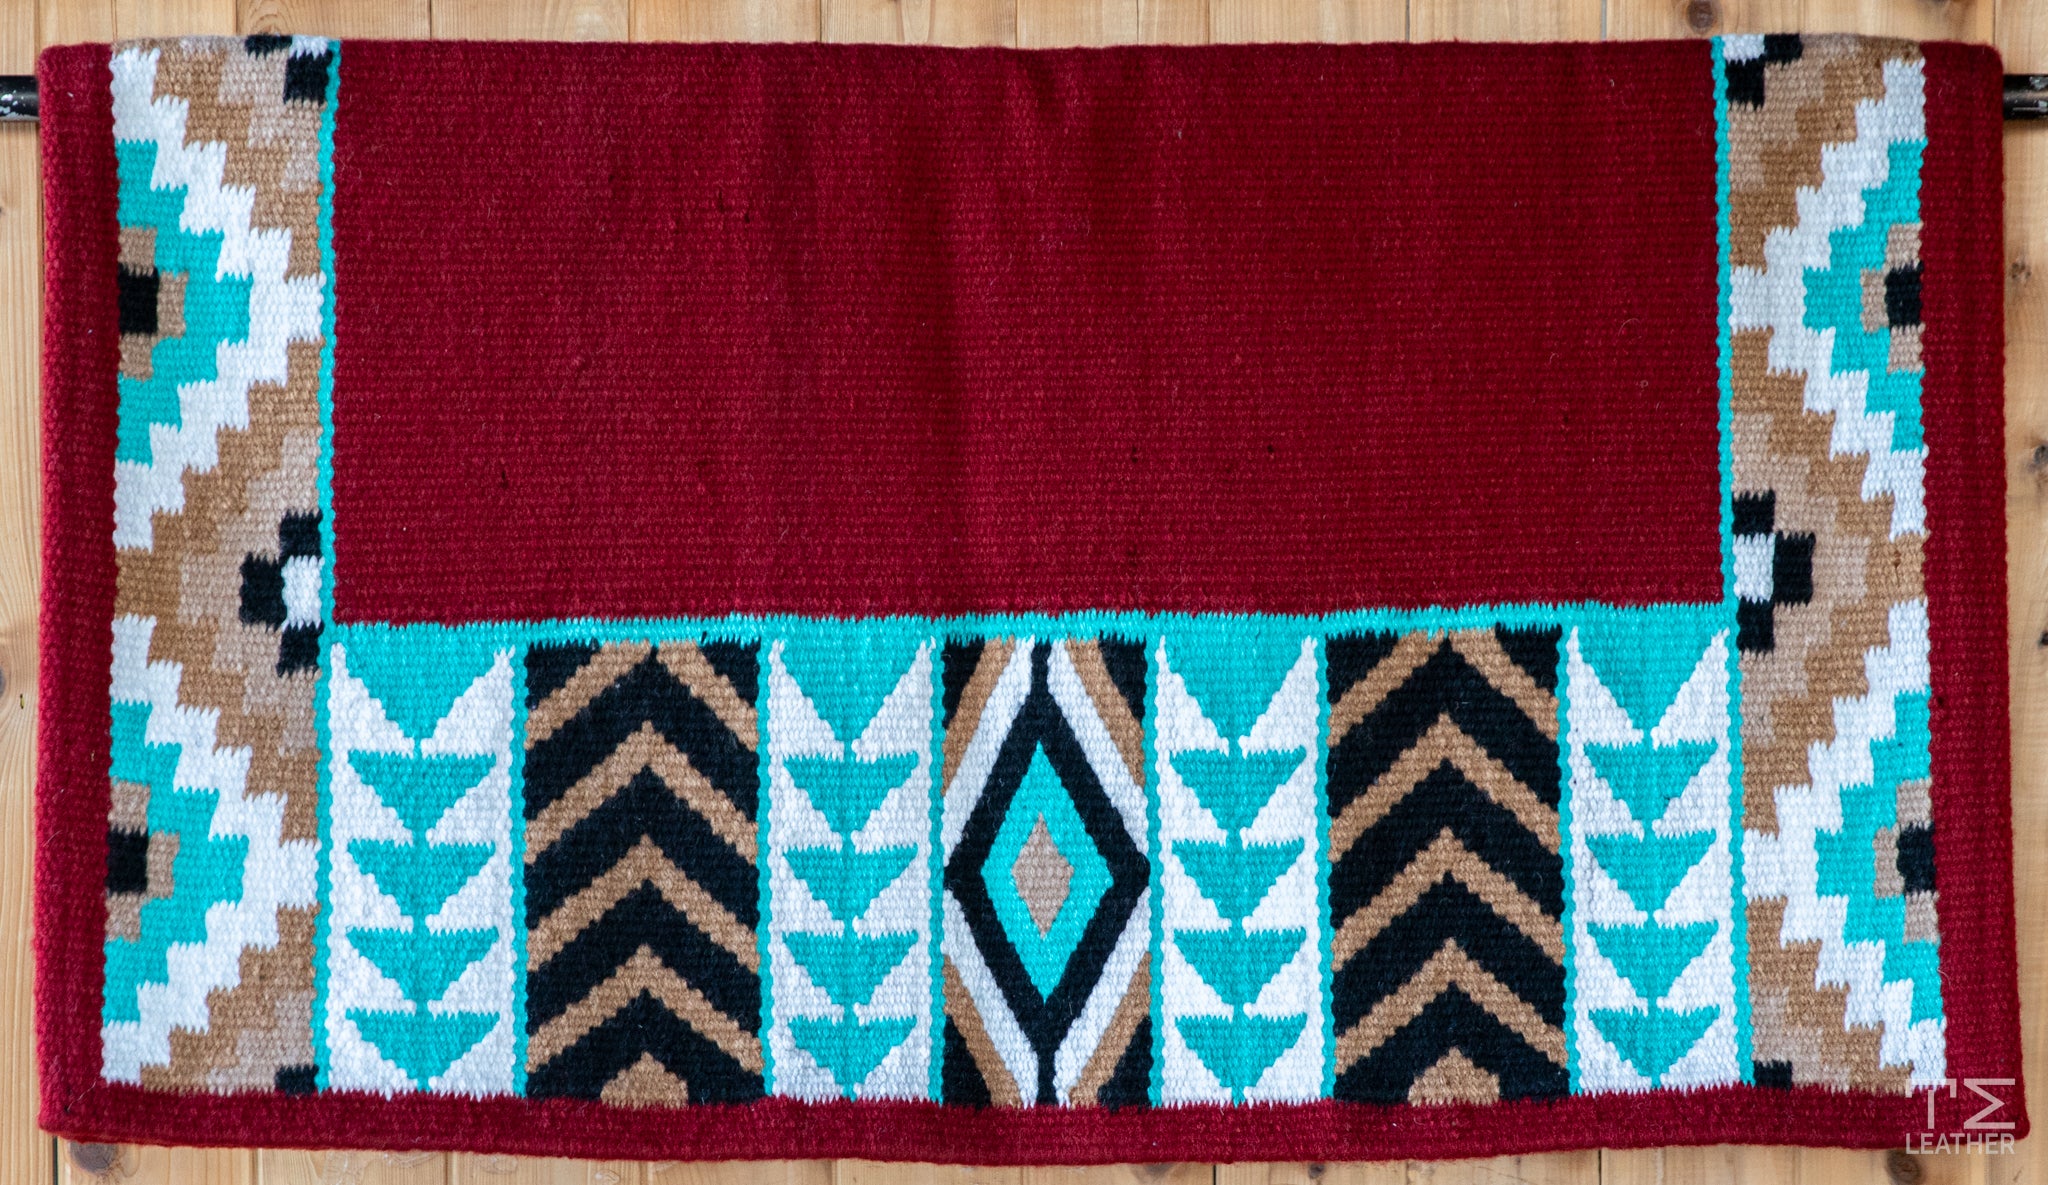 Red, Turquoise, Dark & Light Sand, Black w/ White Accents Flat Show Blanket